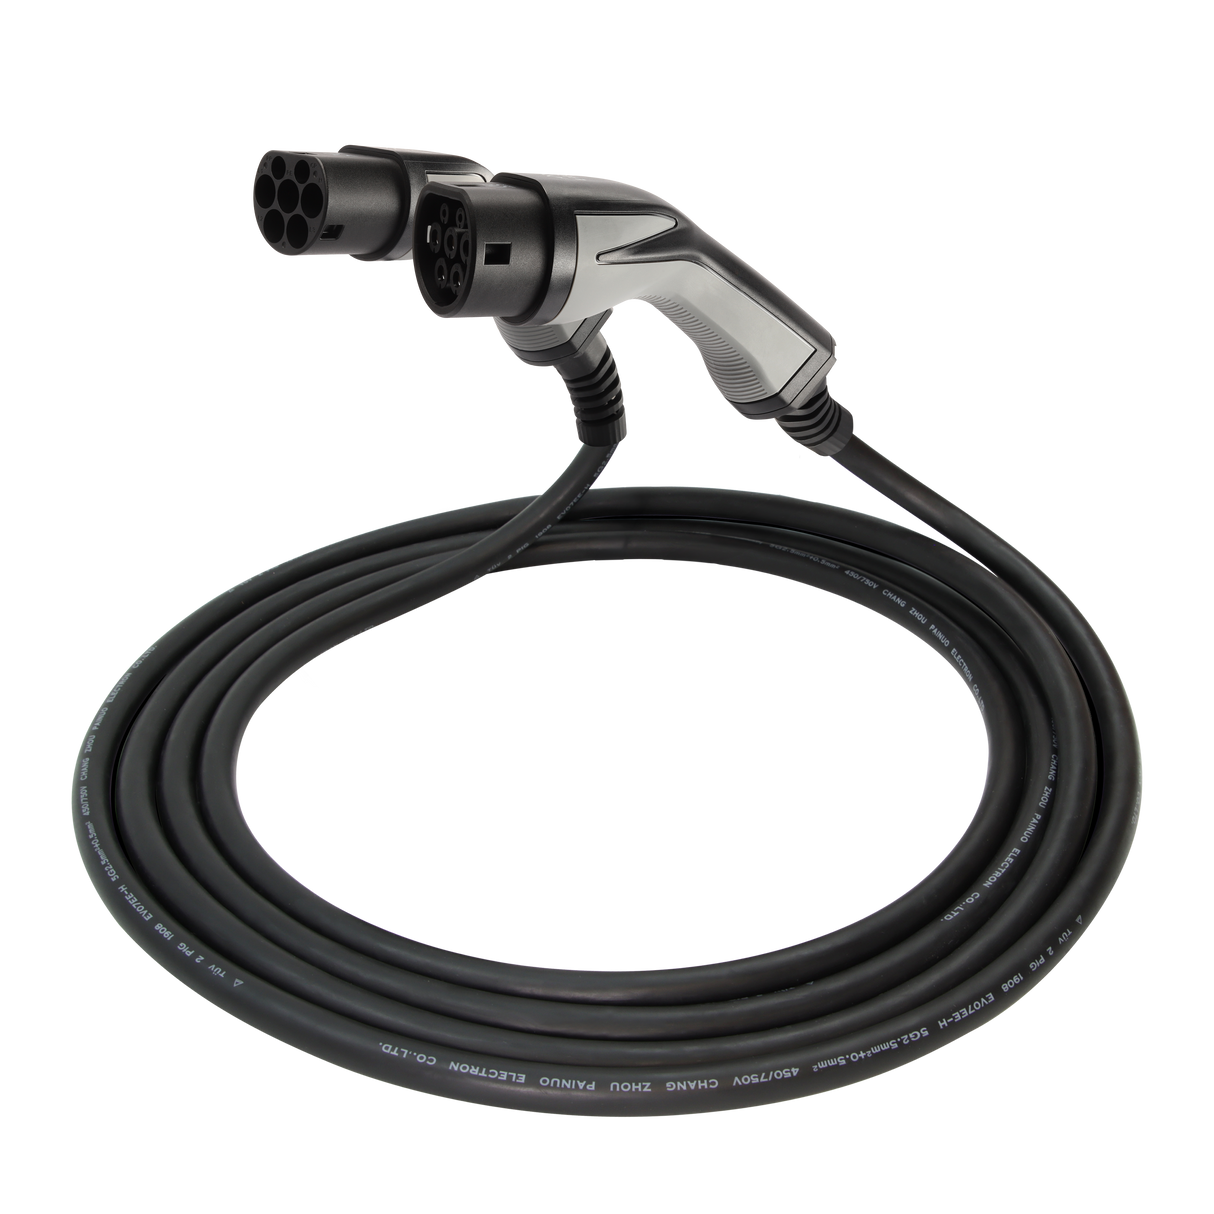 Charging cable Peugeot E -2008 - Erock Pro Type 2 - 16A 3 phase (11 kW)